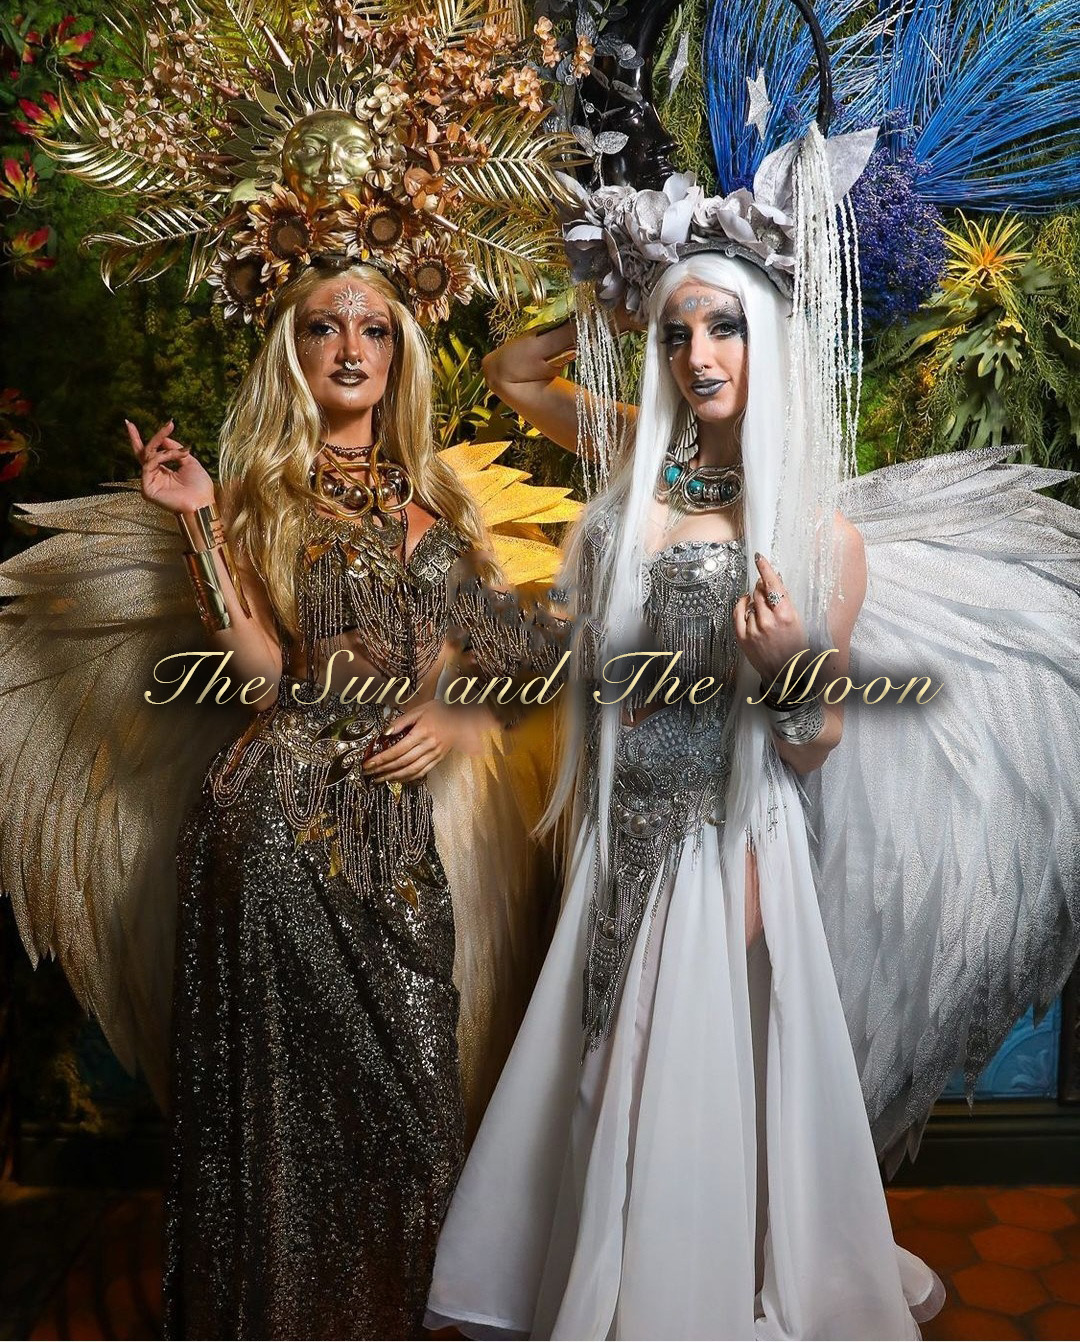 Sun and Moon Goddess performers available for all enchanted and etheareal events